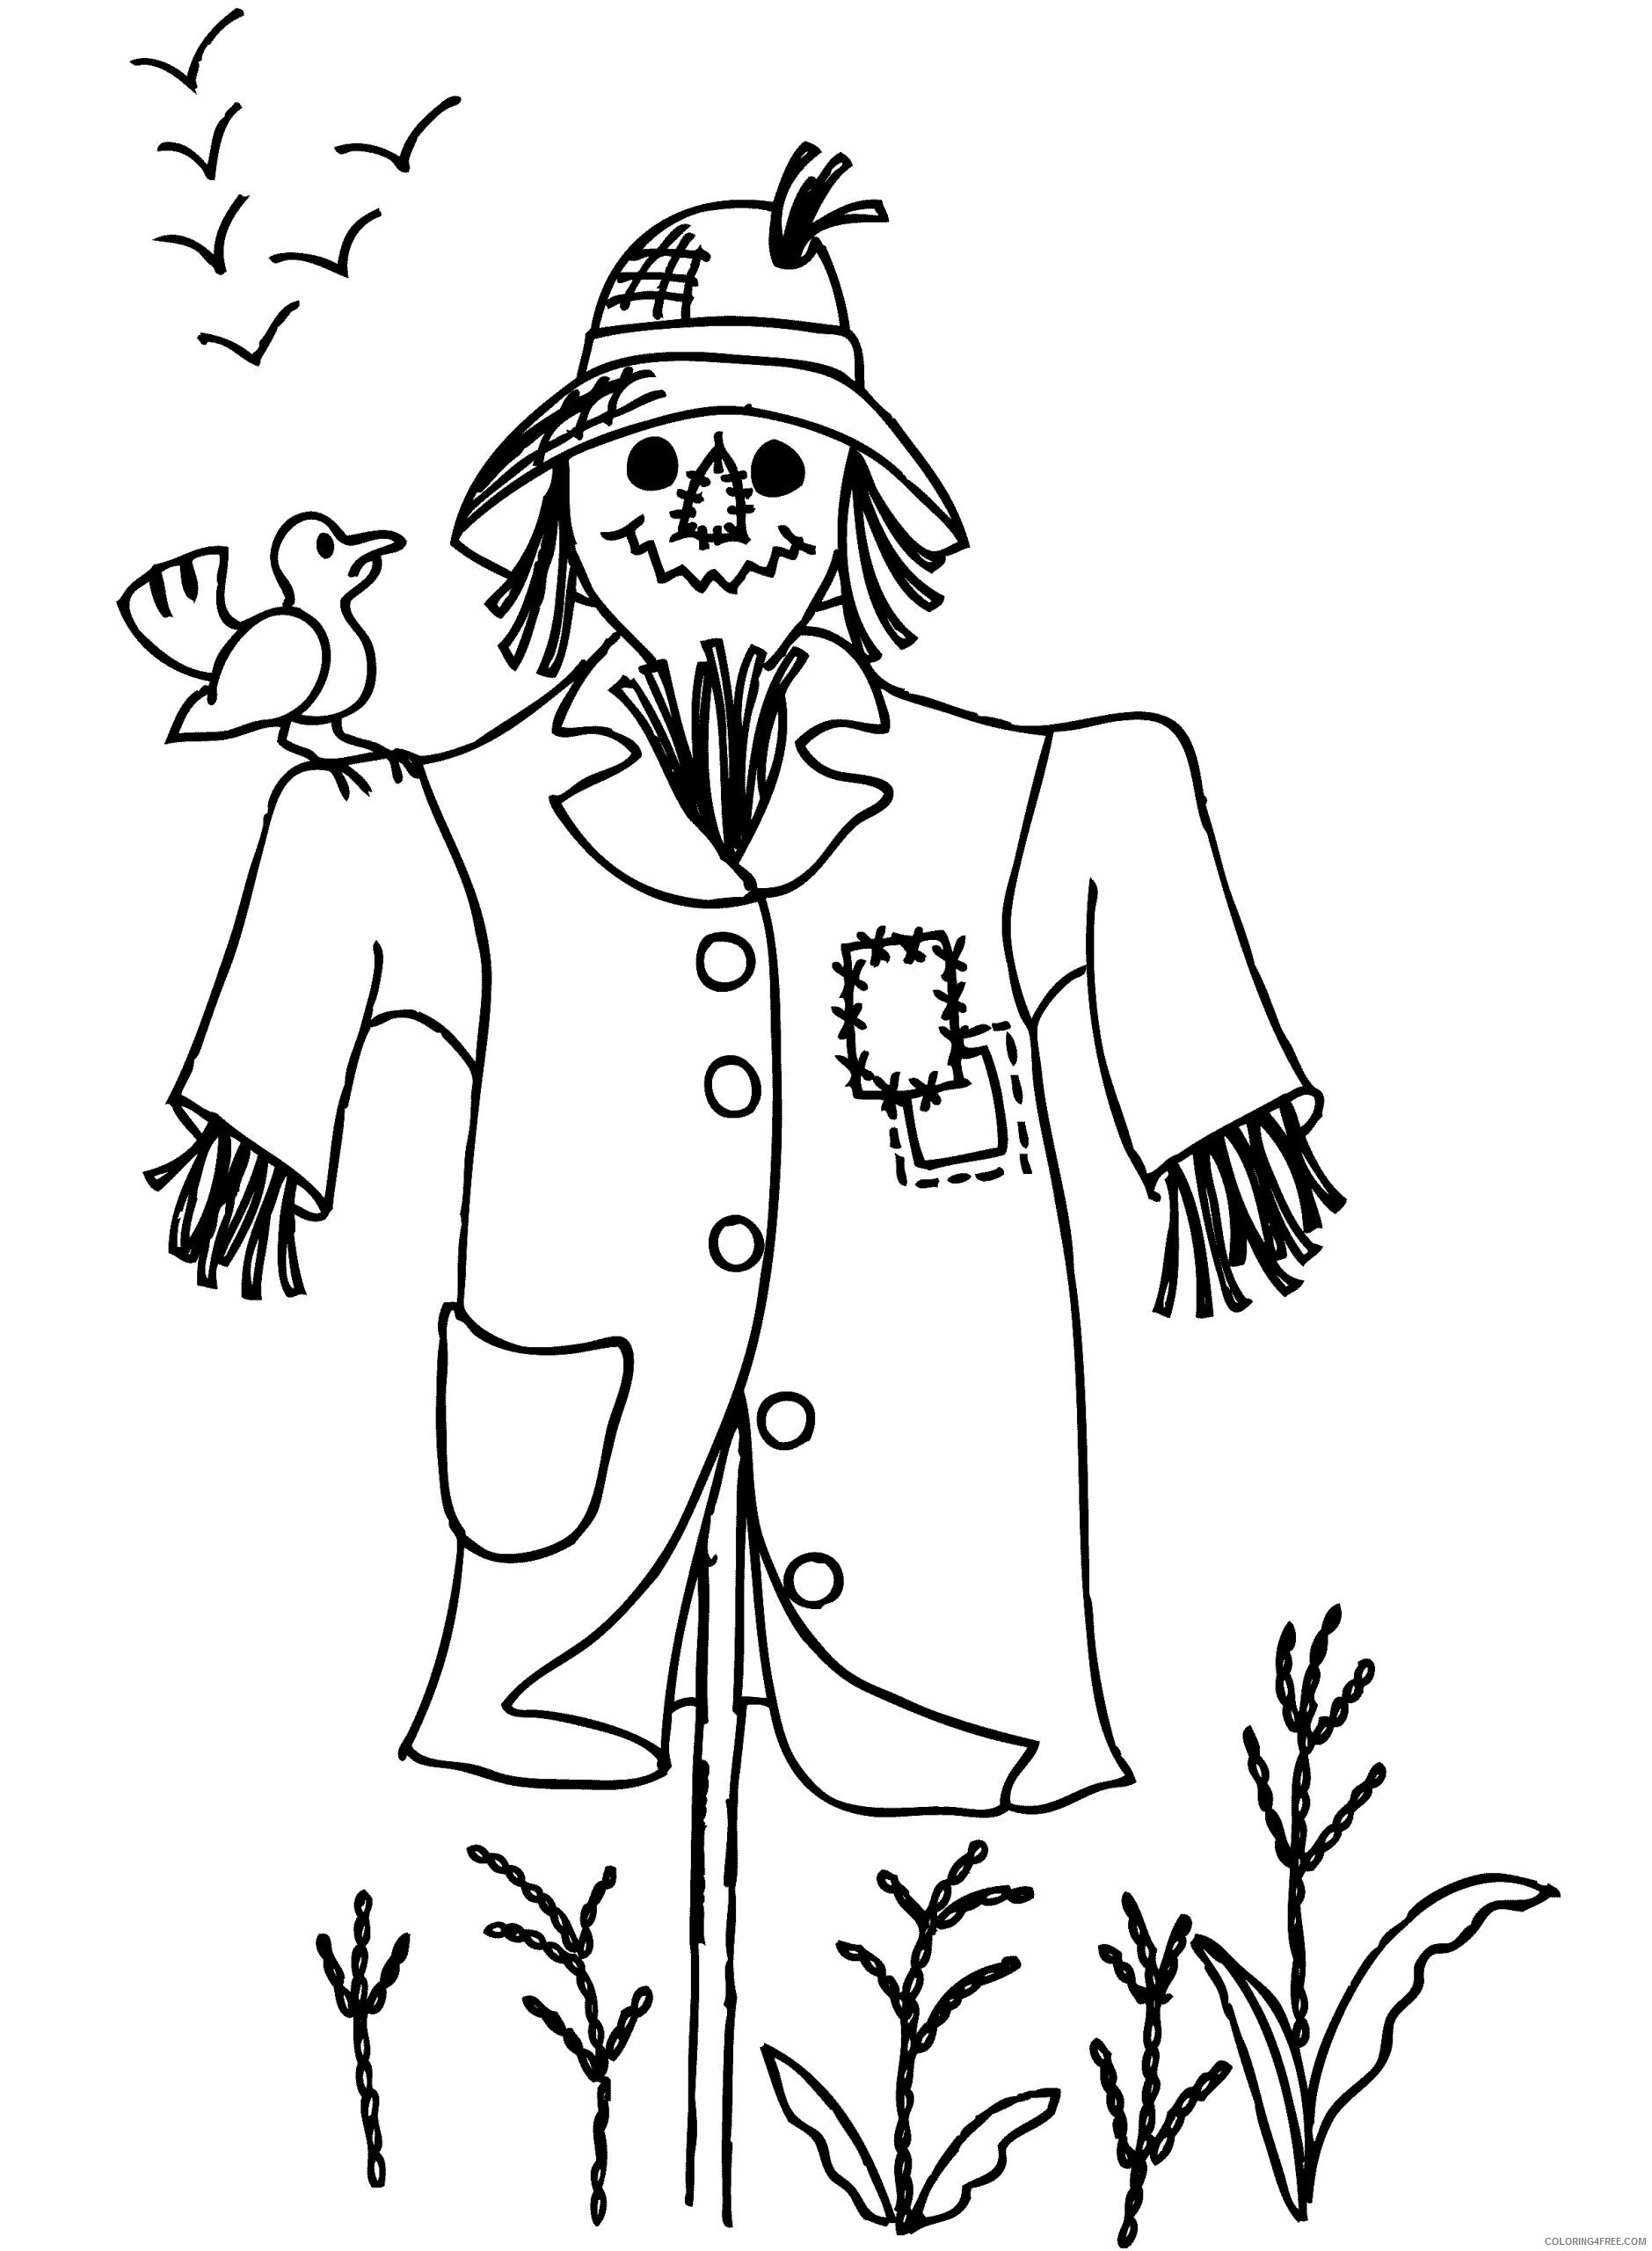 Scarecrow Coloring Pages Crow and Scarecrow scaled Printable 2021 5209 Coloring4free